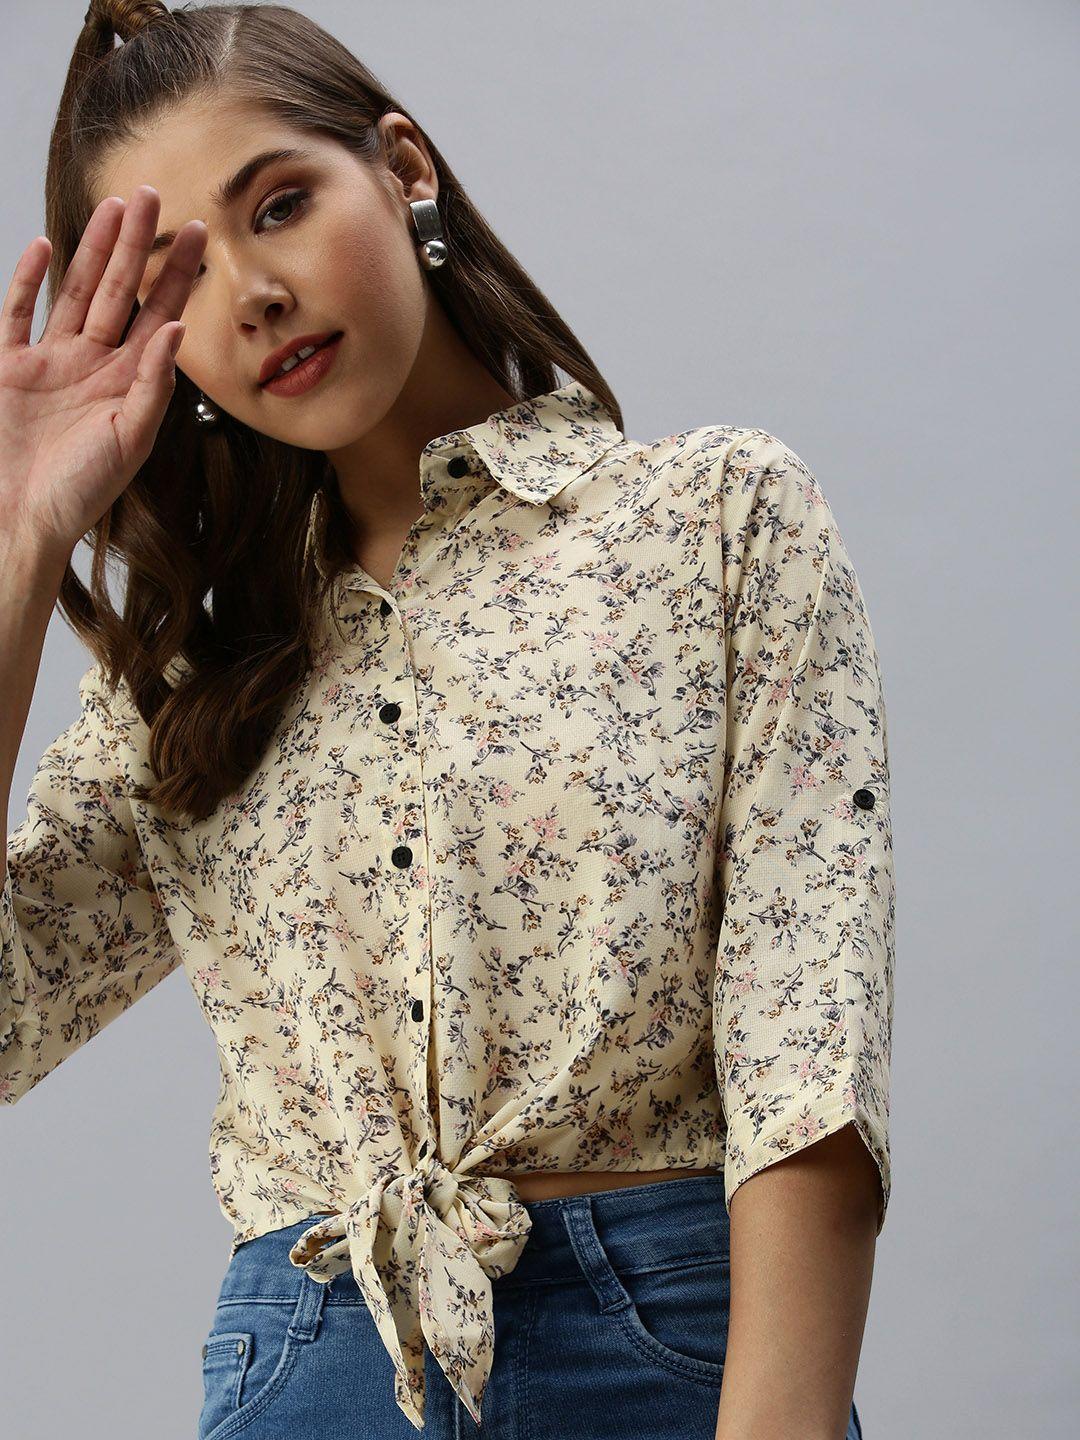 SHOWOFF Yellow Floral Print Shirt Style Crop Top